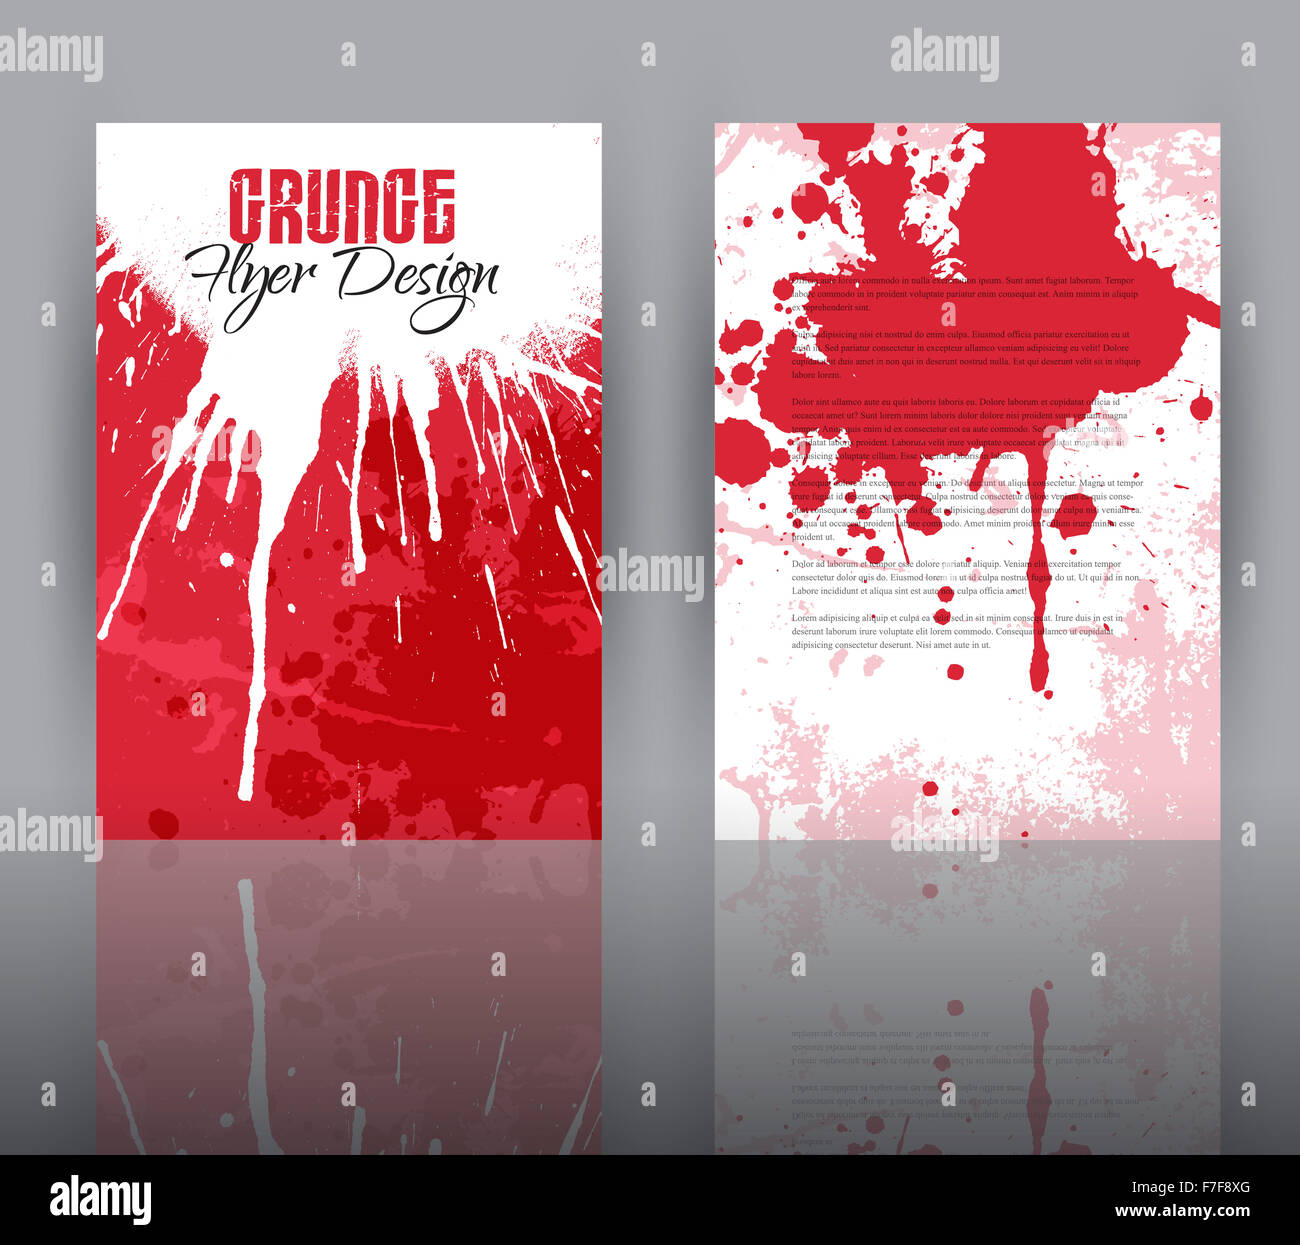 Double sided flyer template with a grunge design Stock Photo